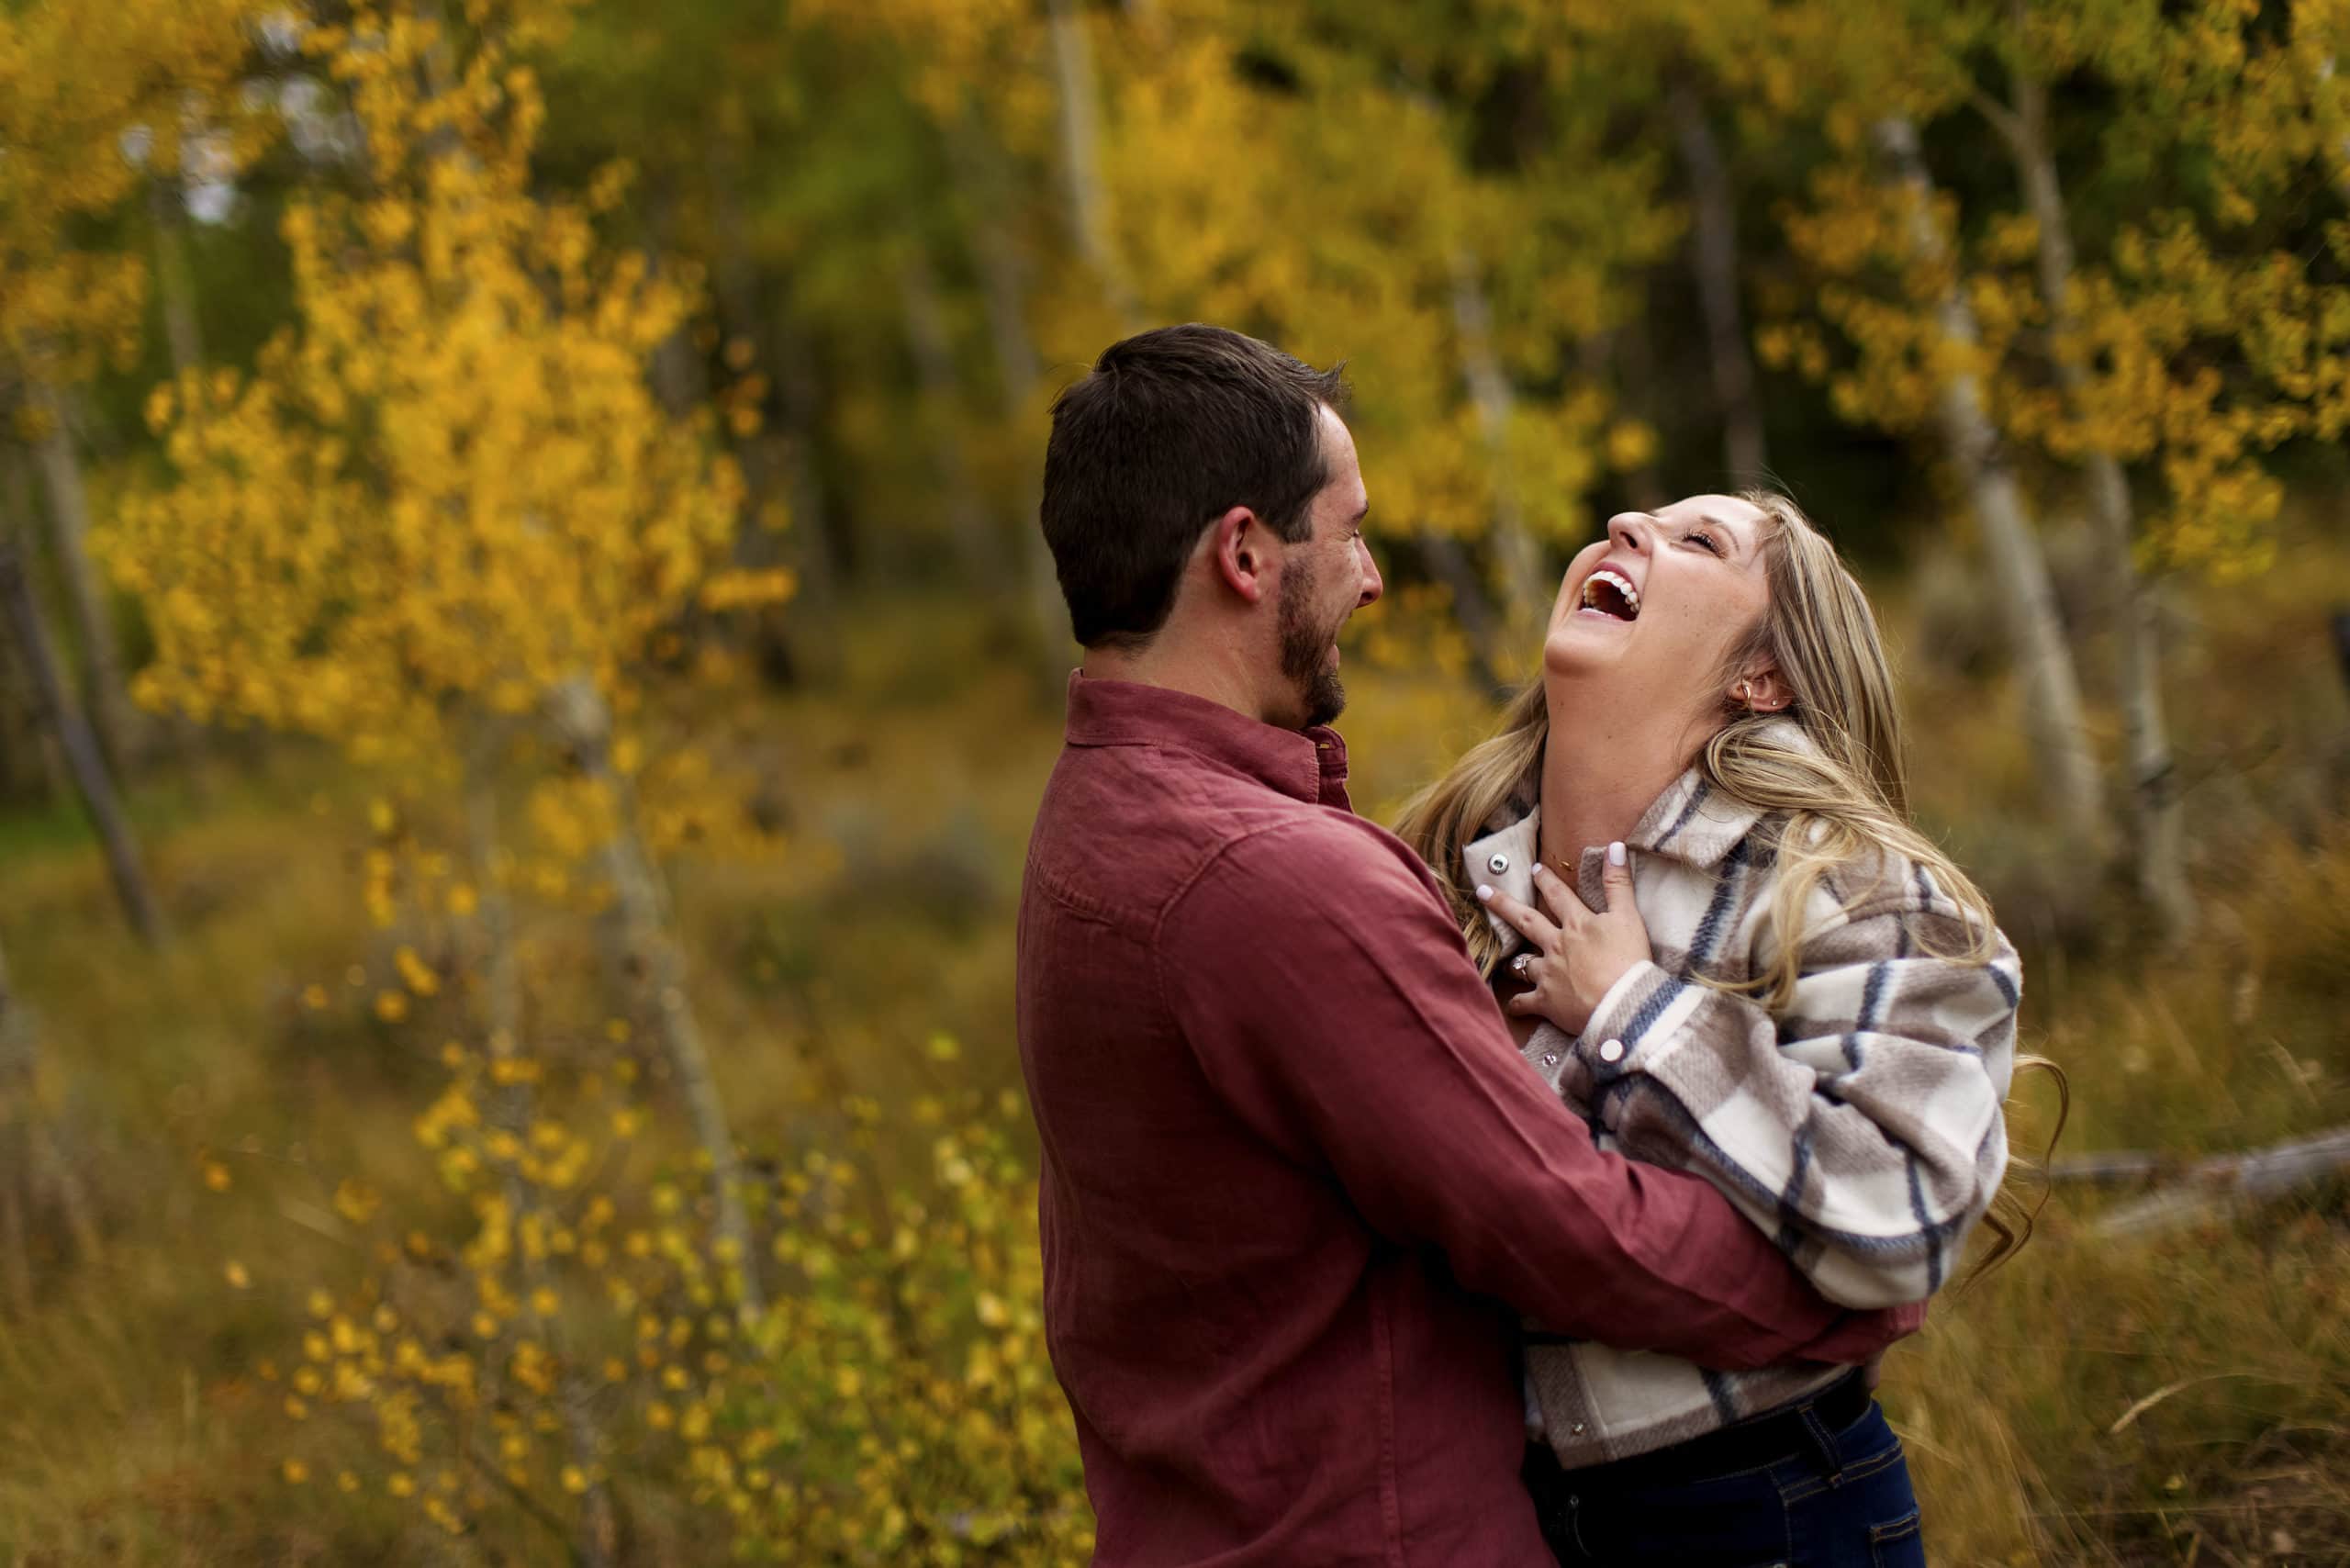 Jamie and Chad share a laugh during their engagement session